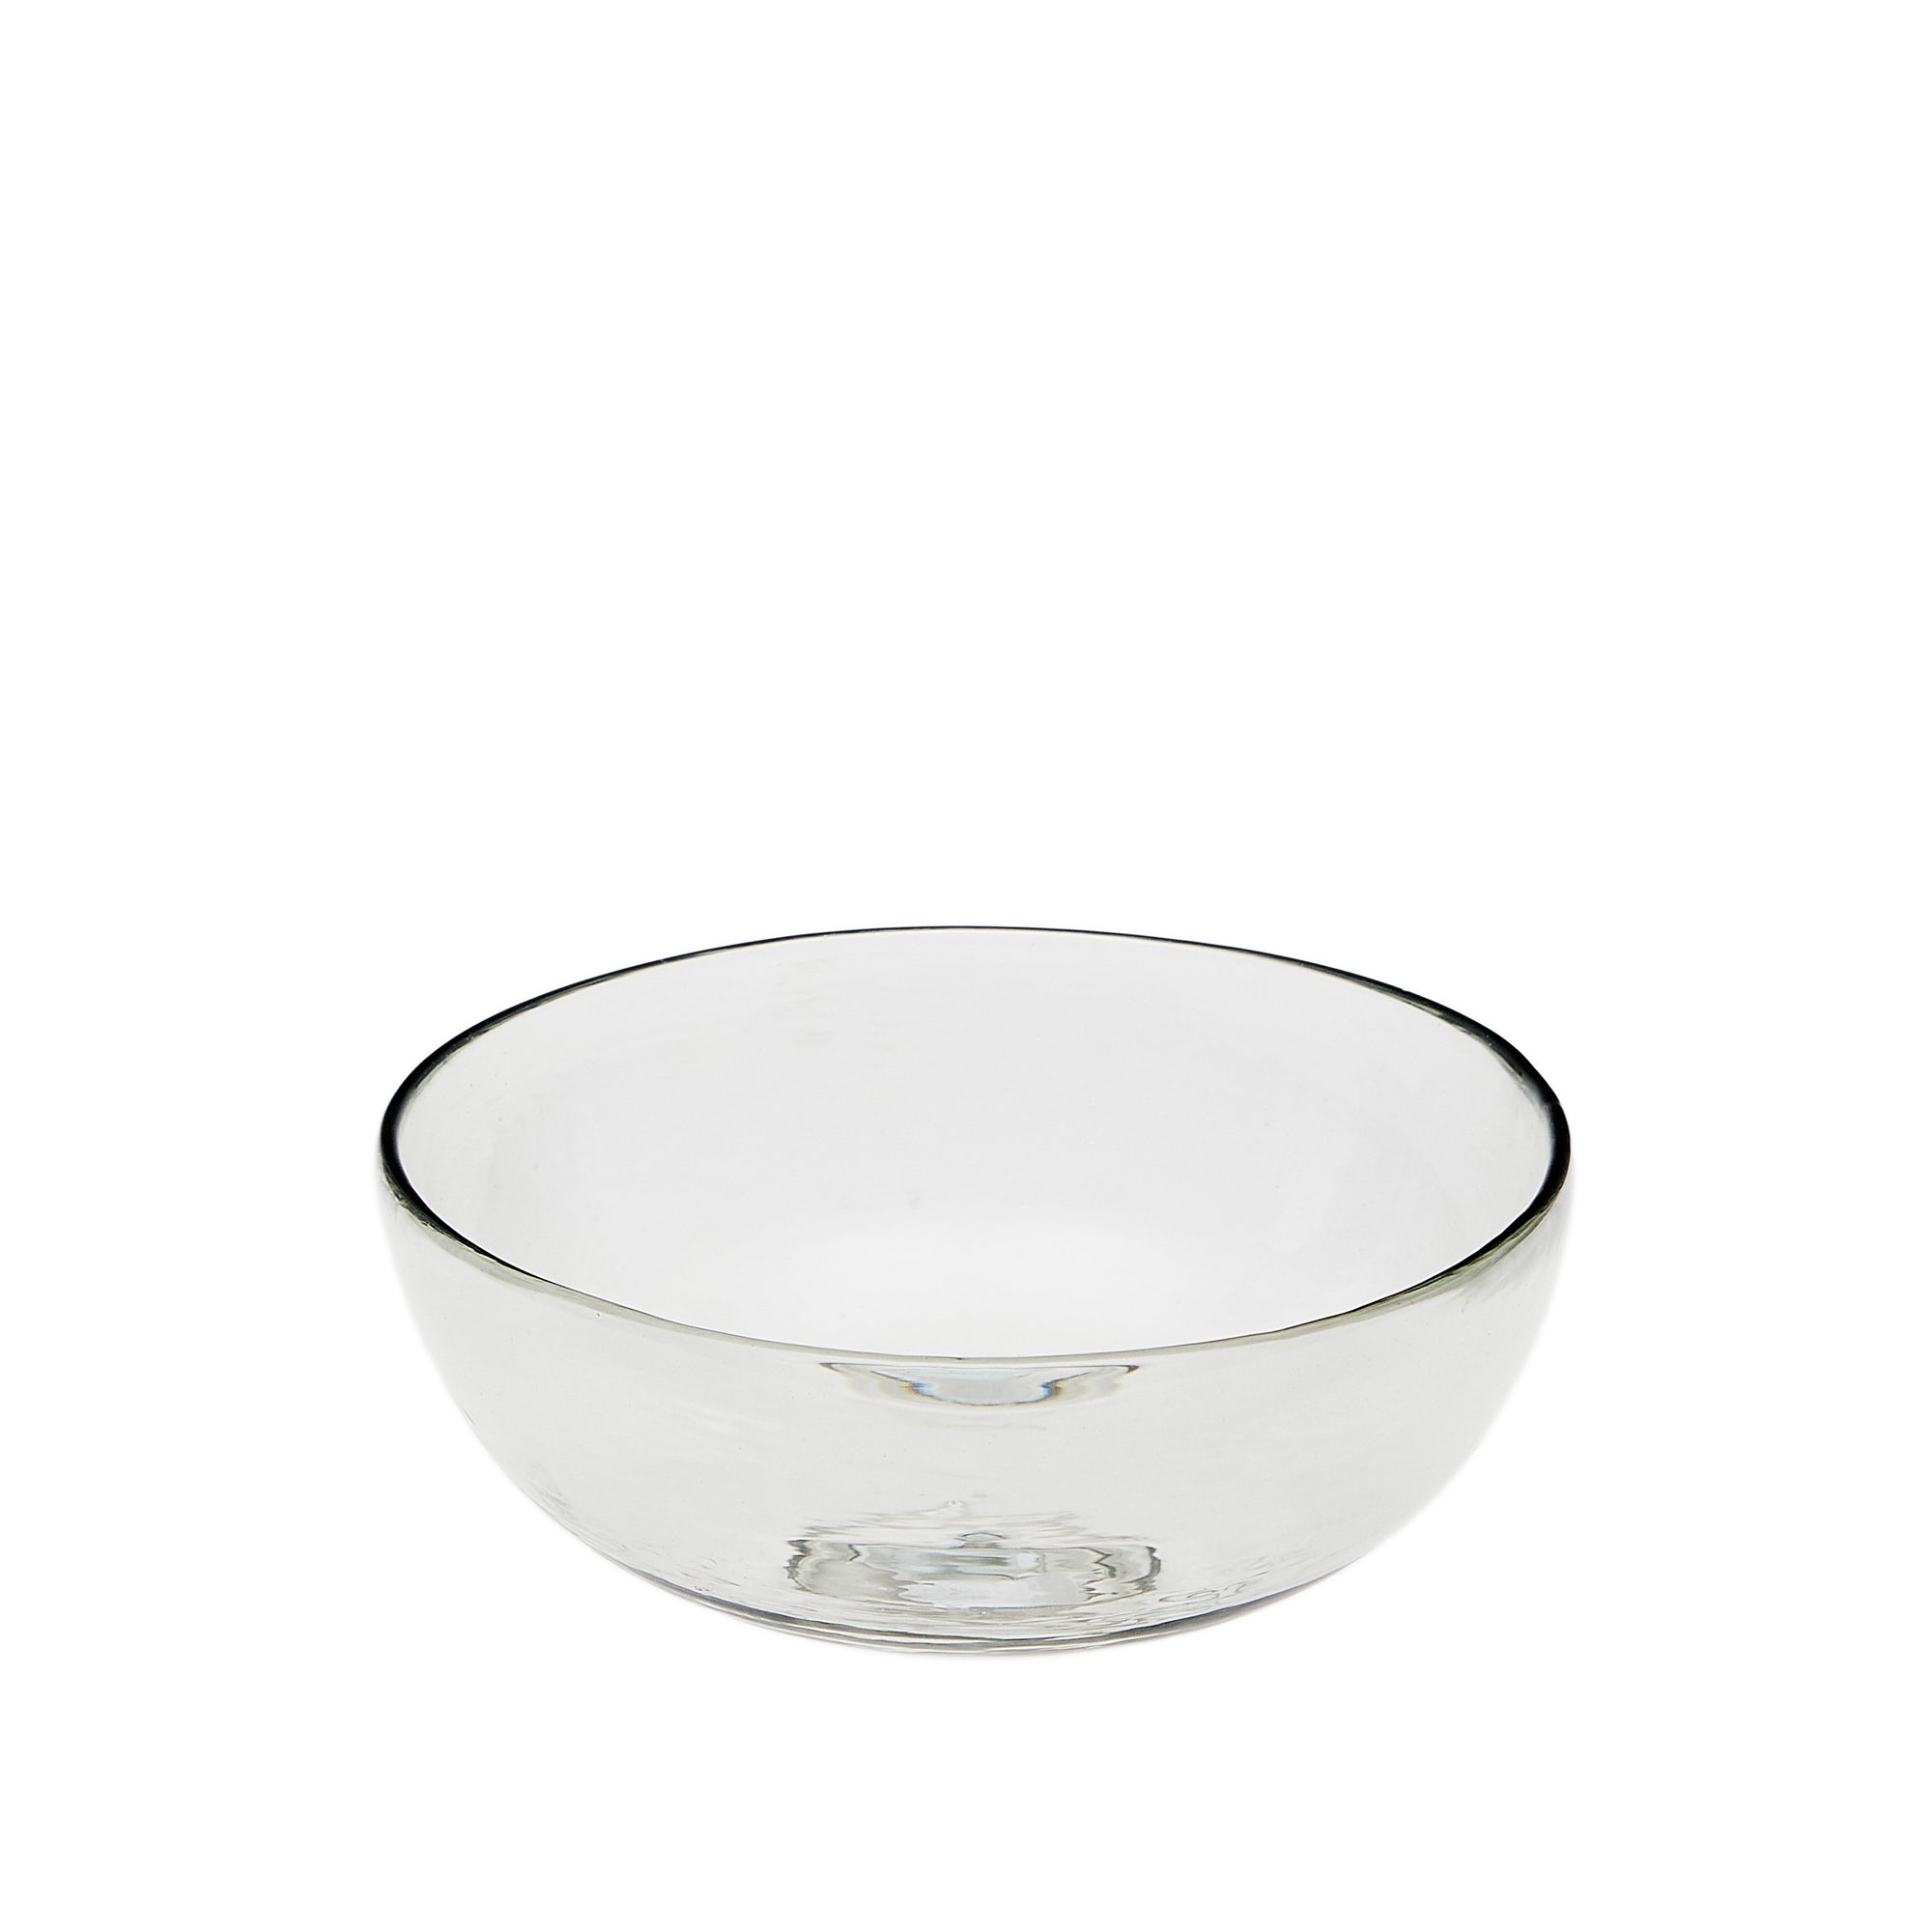 Silitia large bowl, made of transparent recycled glass